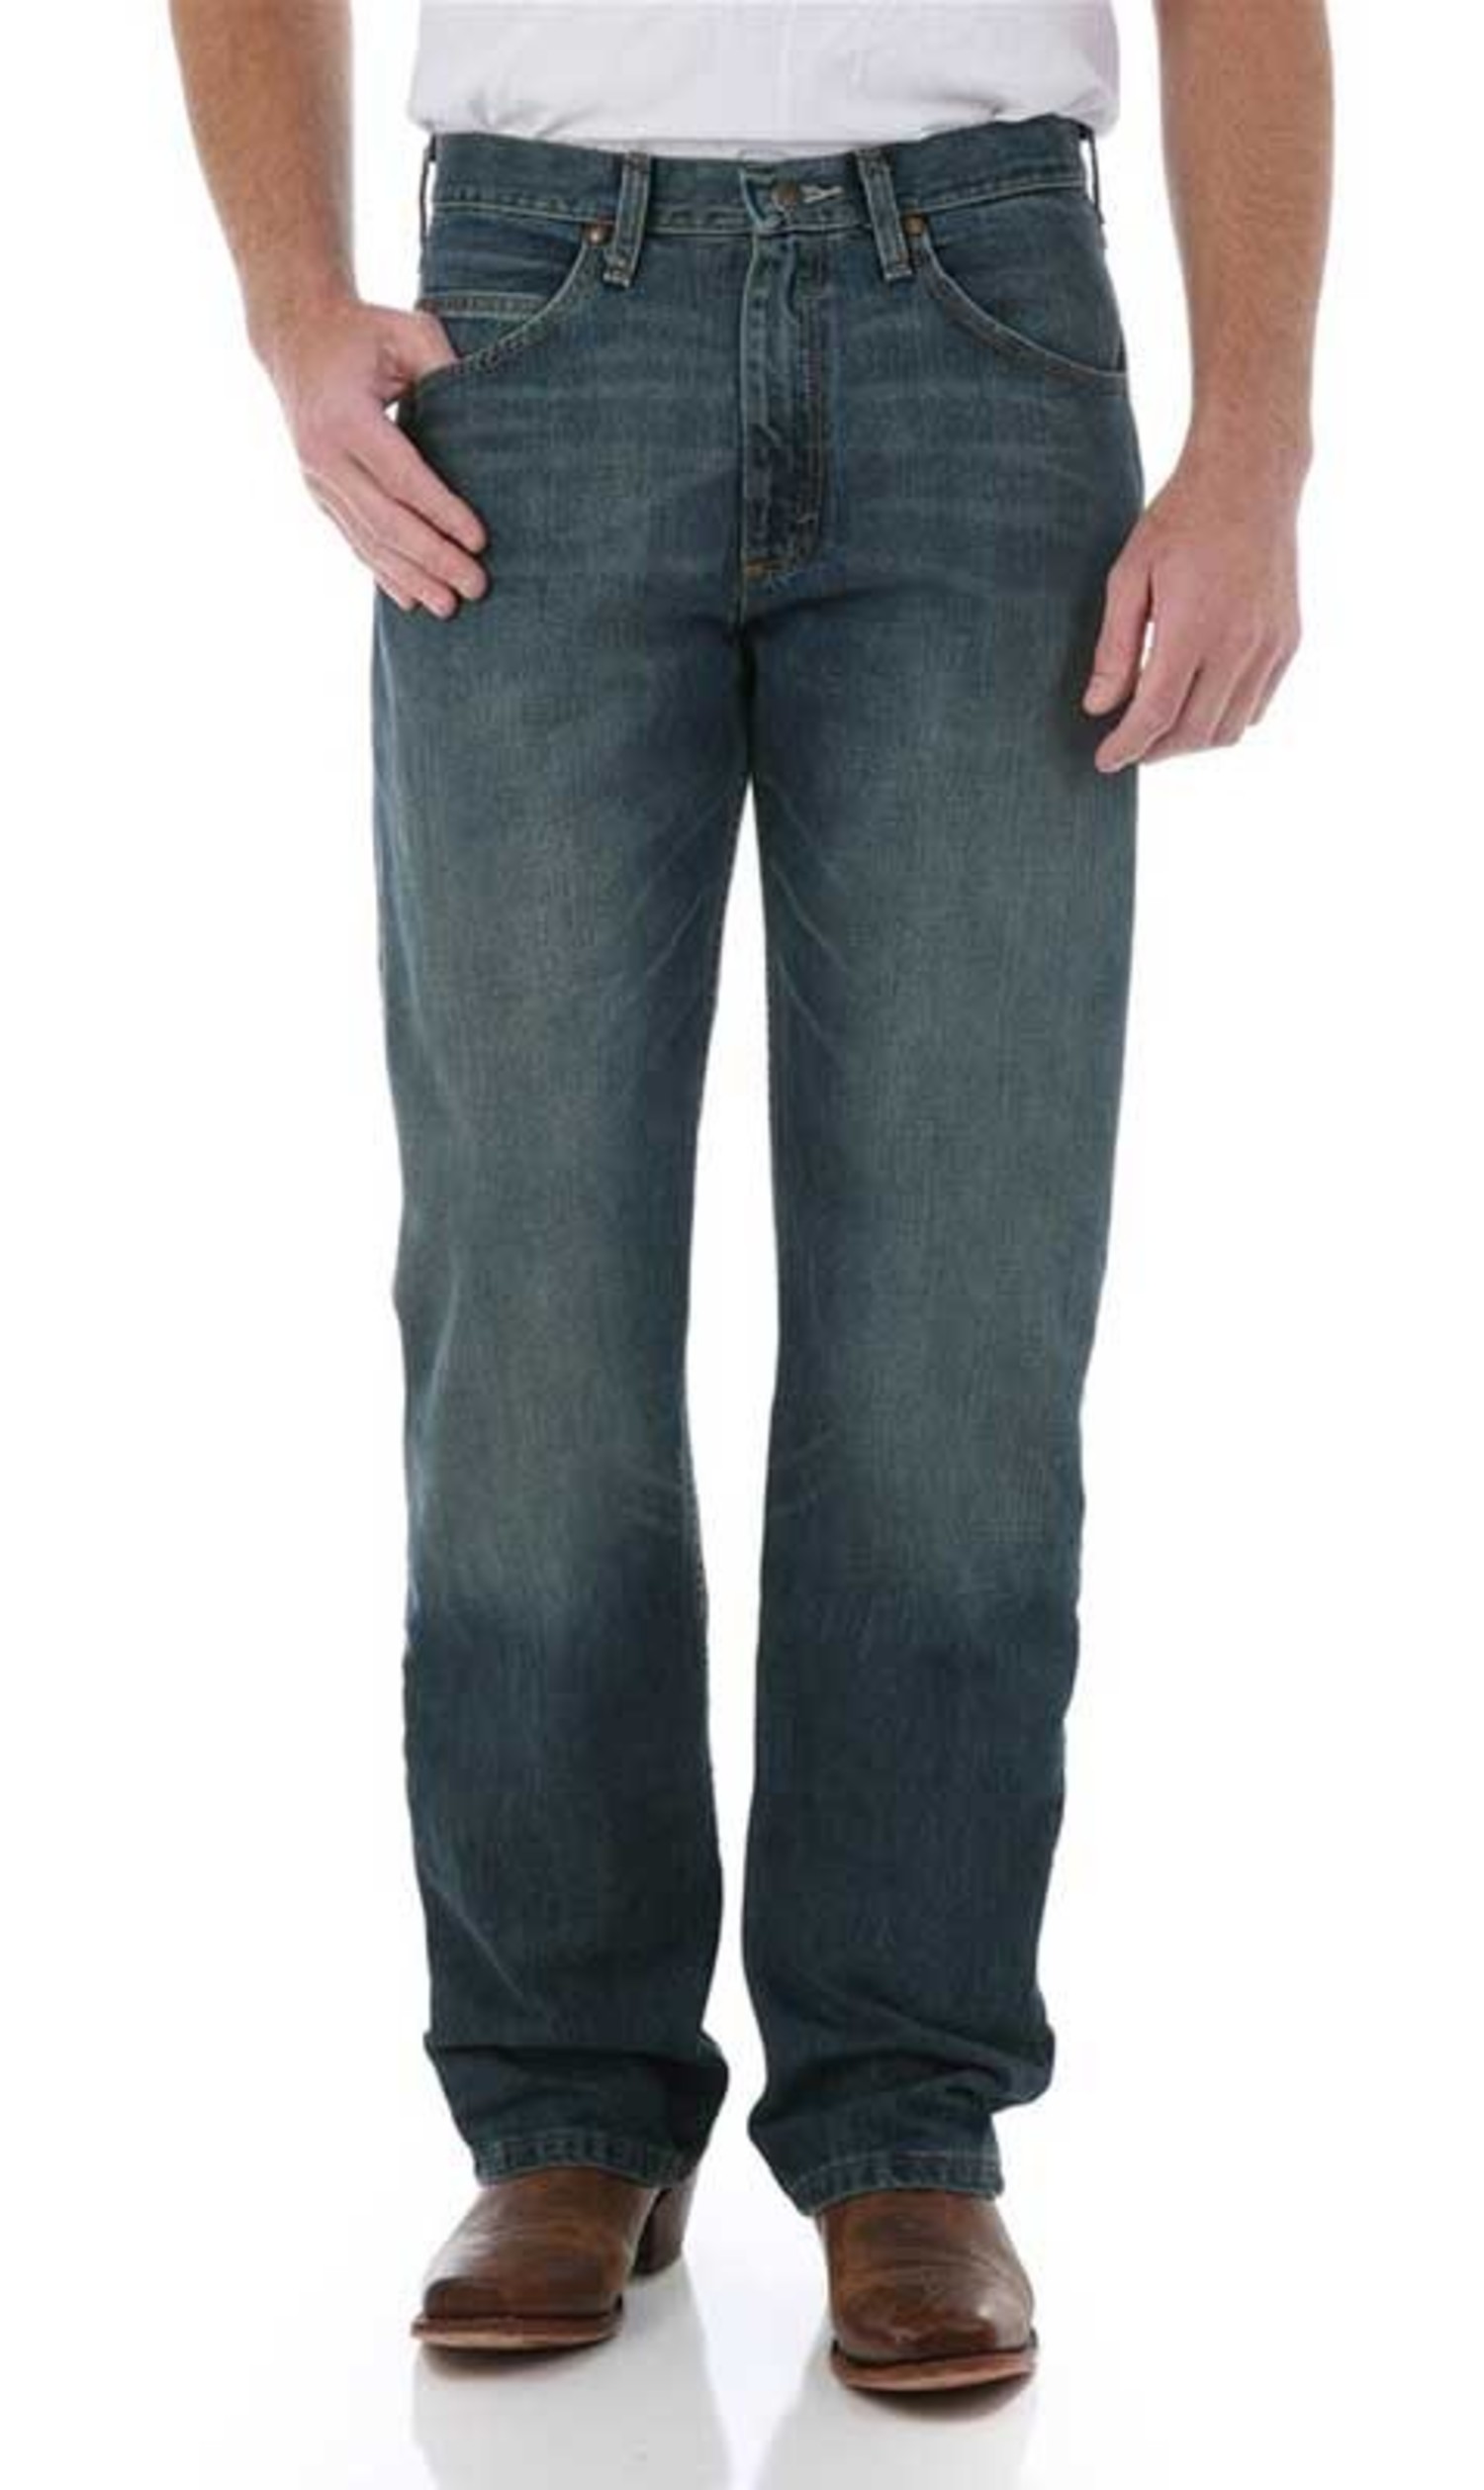 Wrangler 20X 01 Competition Jeans | River Wash - Frontier Western Shop